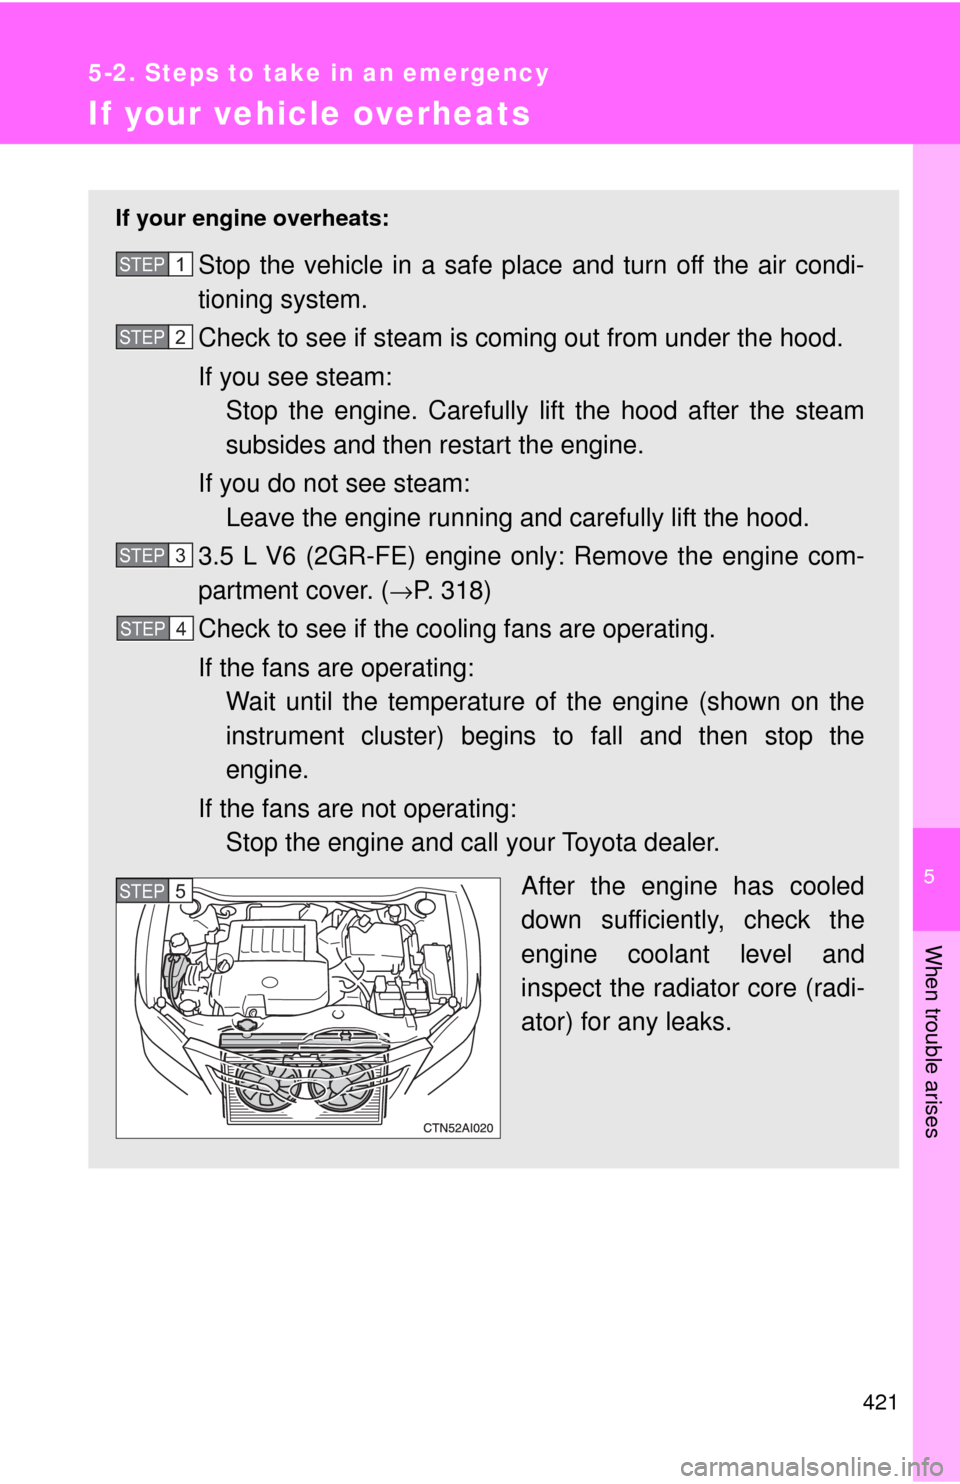 TOYOTA CAMRY 2009 XV40 / 8.G Owners Manual 5
When trouble arises
421
5-2. Steps to take in an emergency
If your vehicle overheats
If your engine overheats:
Stop the vehicle in a safe place and turn off the air condi-
tioning system.
Check to s